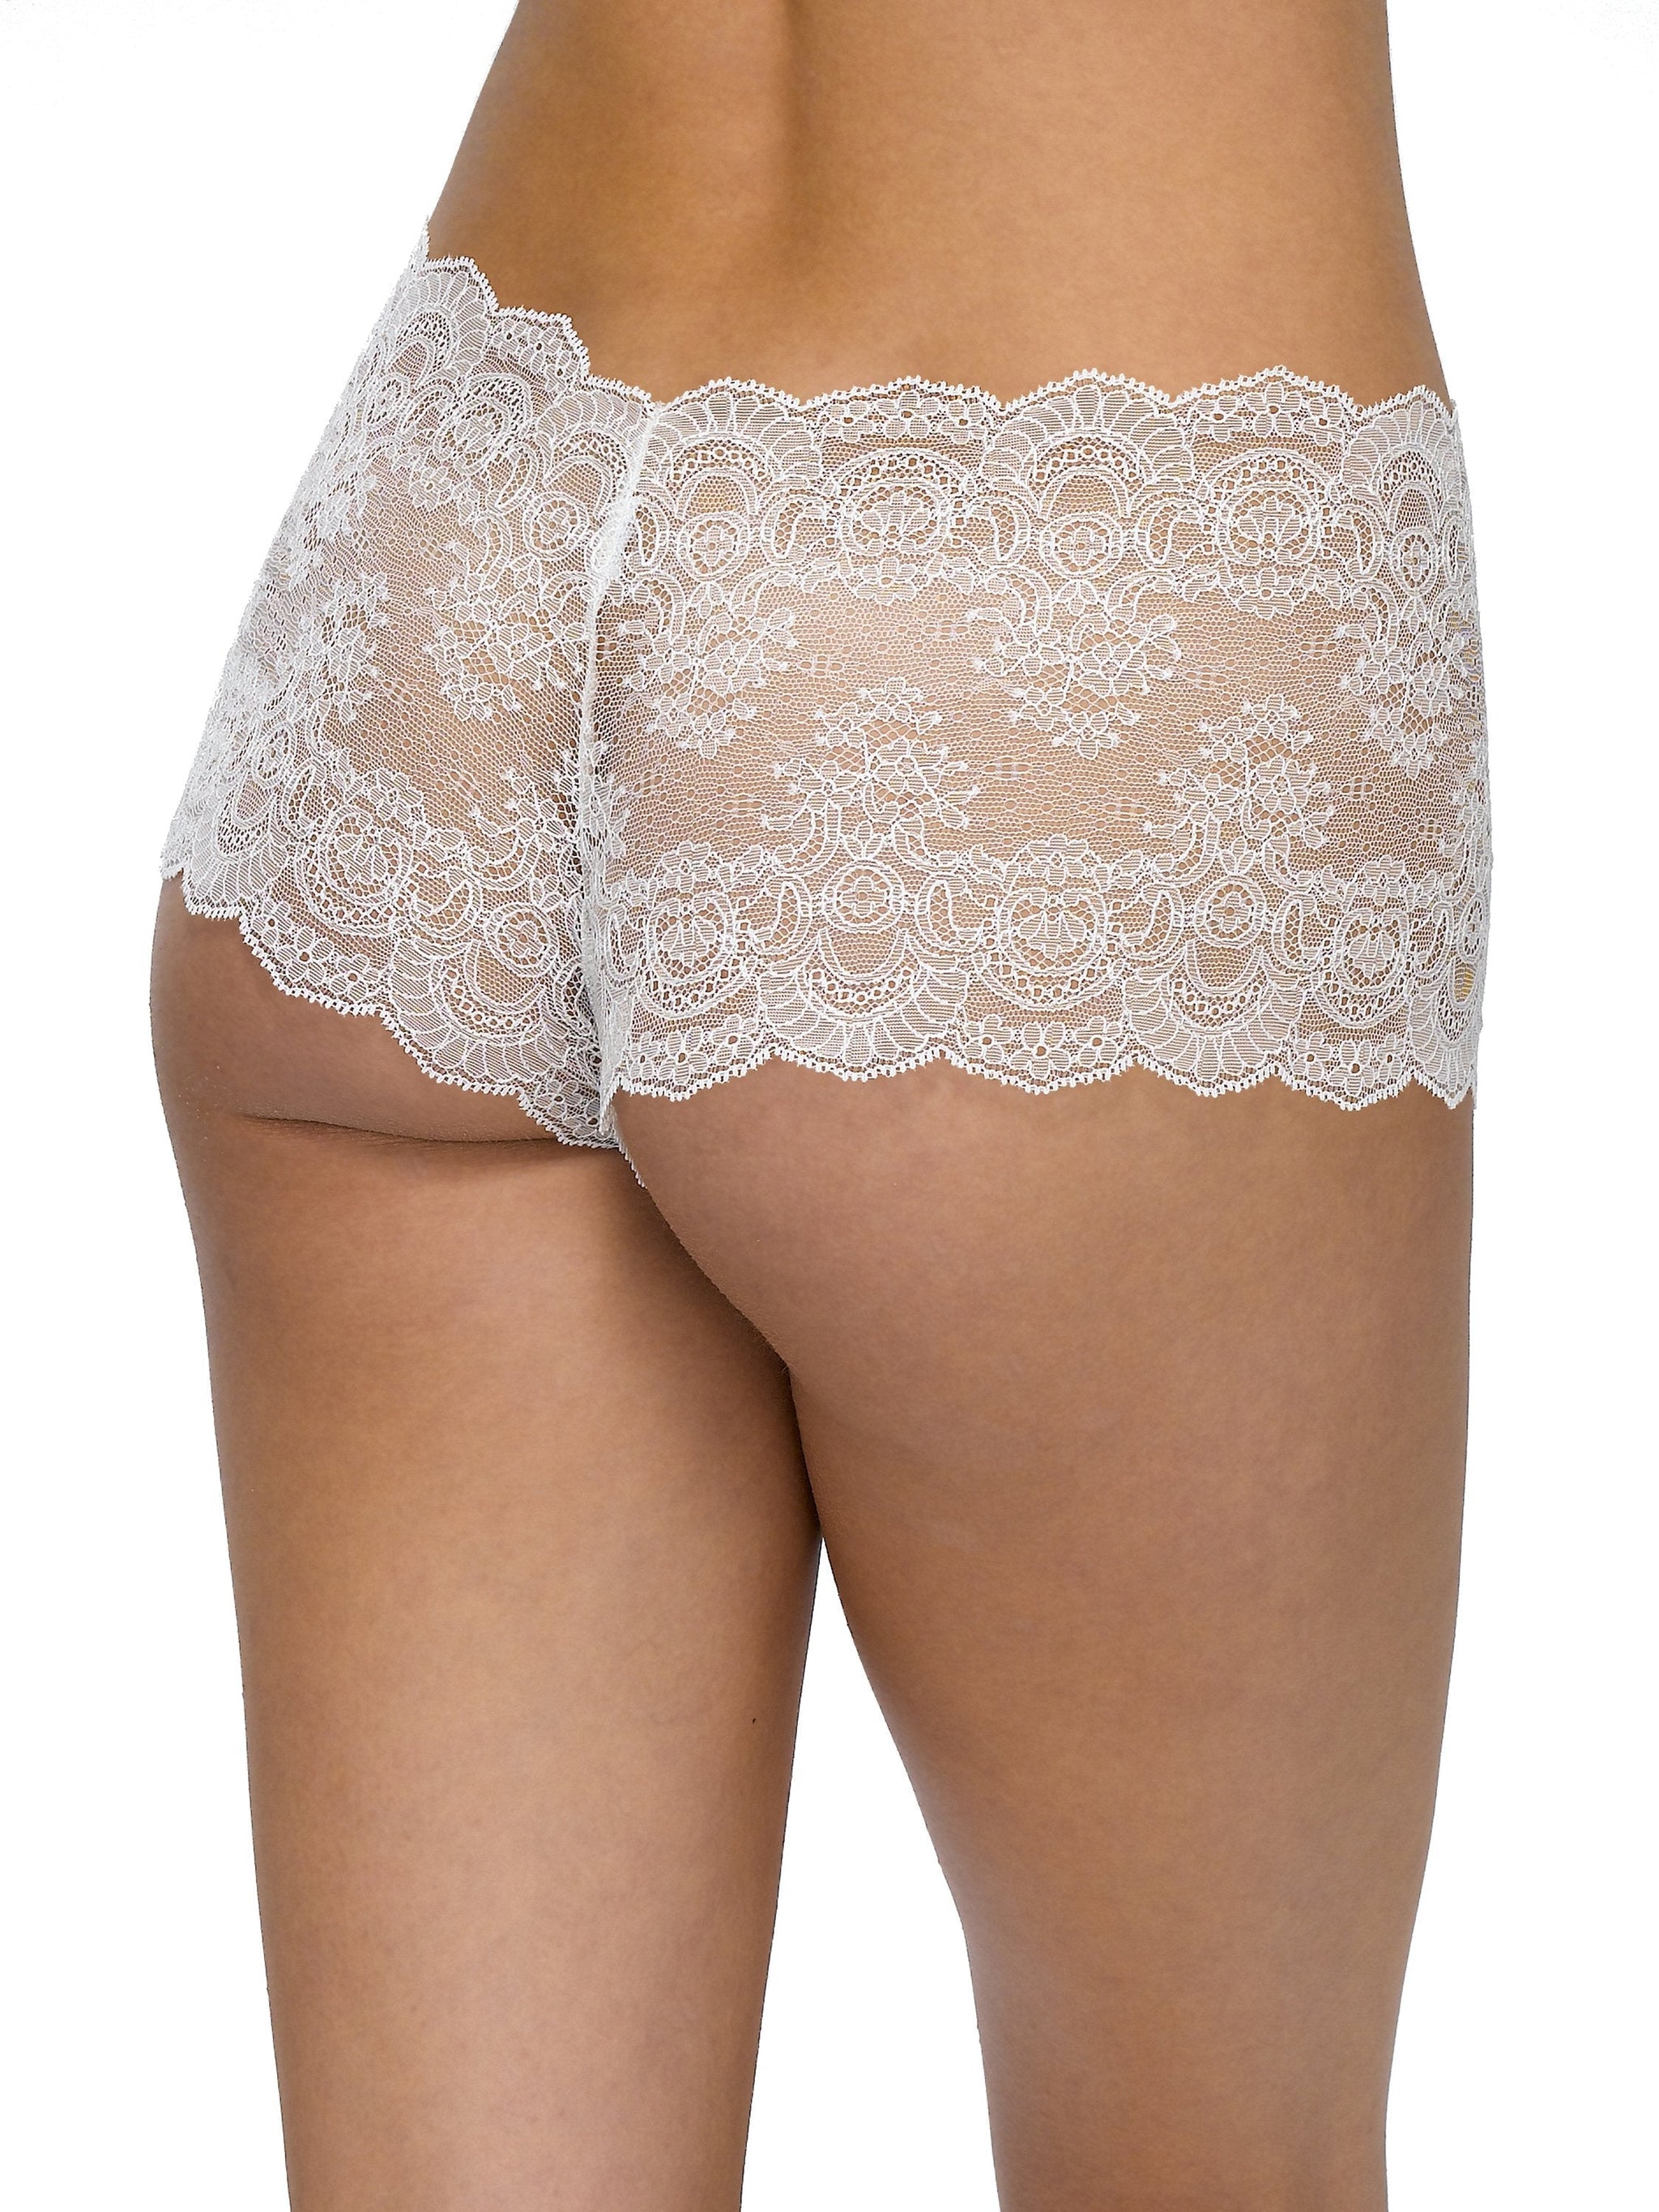 Luxe Lace Crotchless Brief